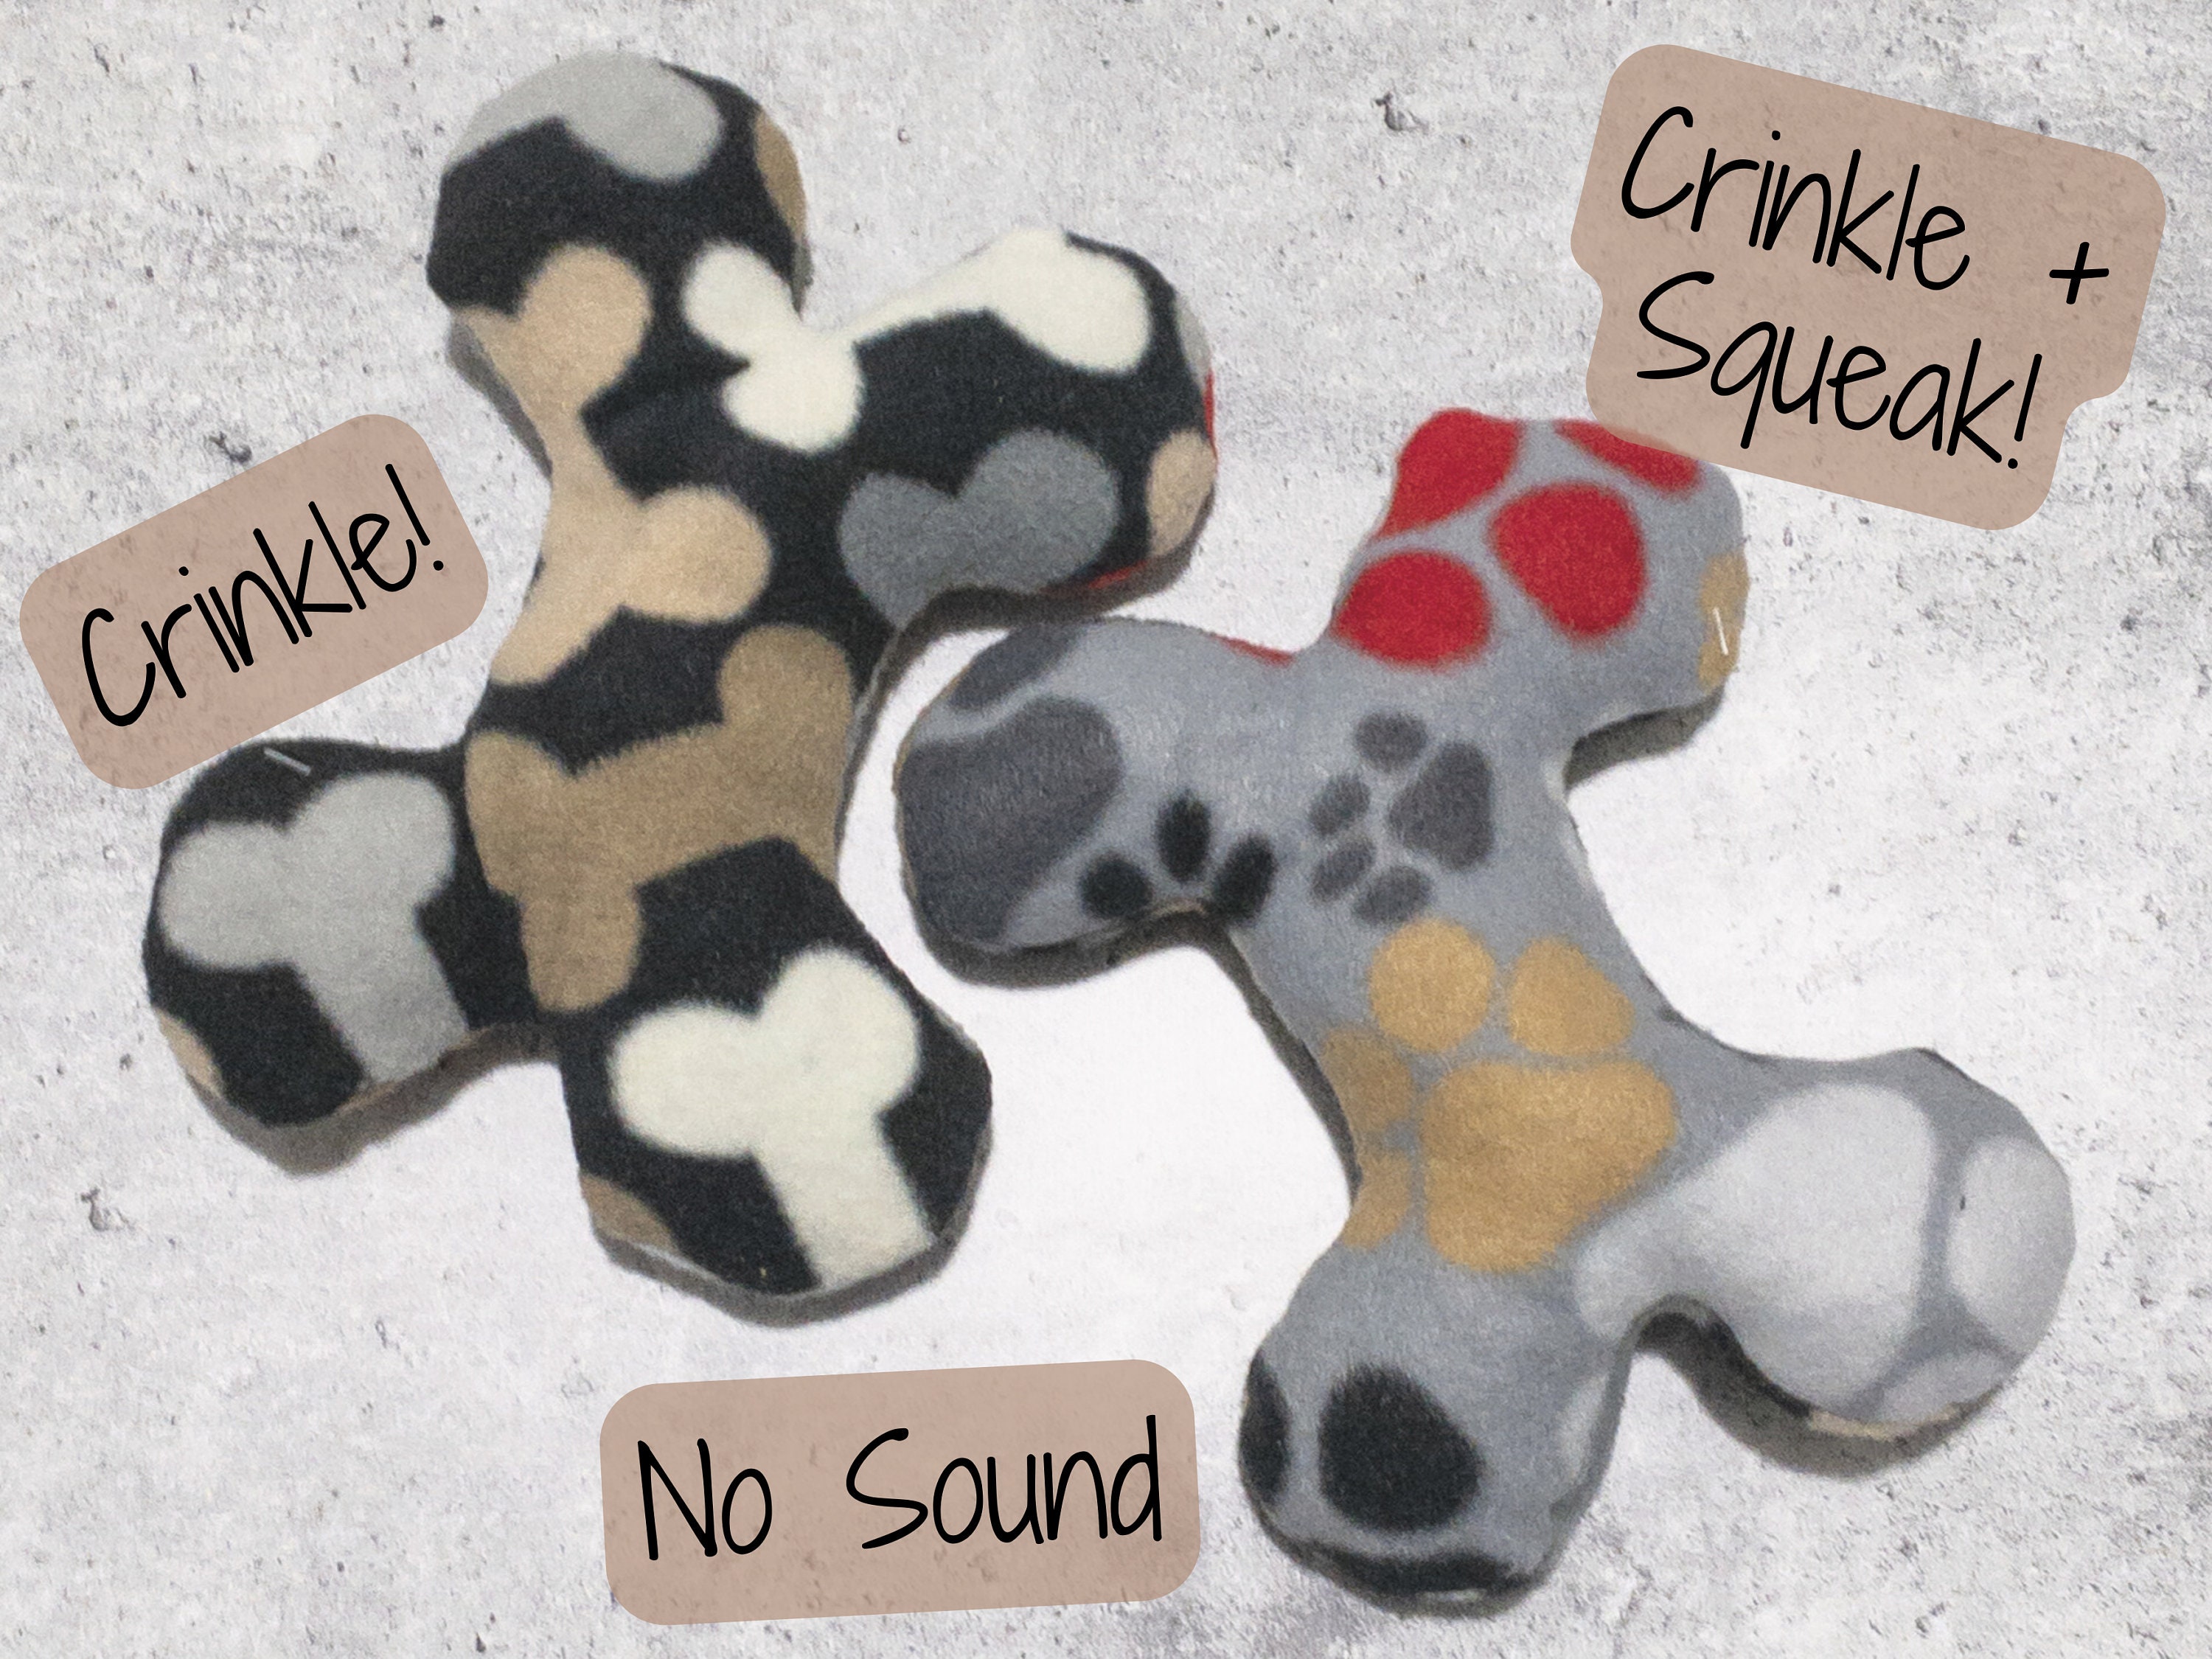 Dog Puzzle Toys Enrichment Treat Dispensing Squeaky Crinkle